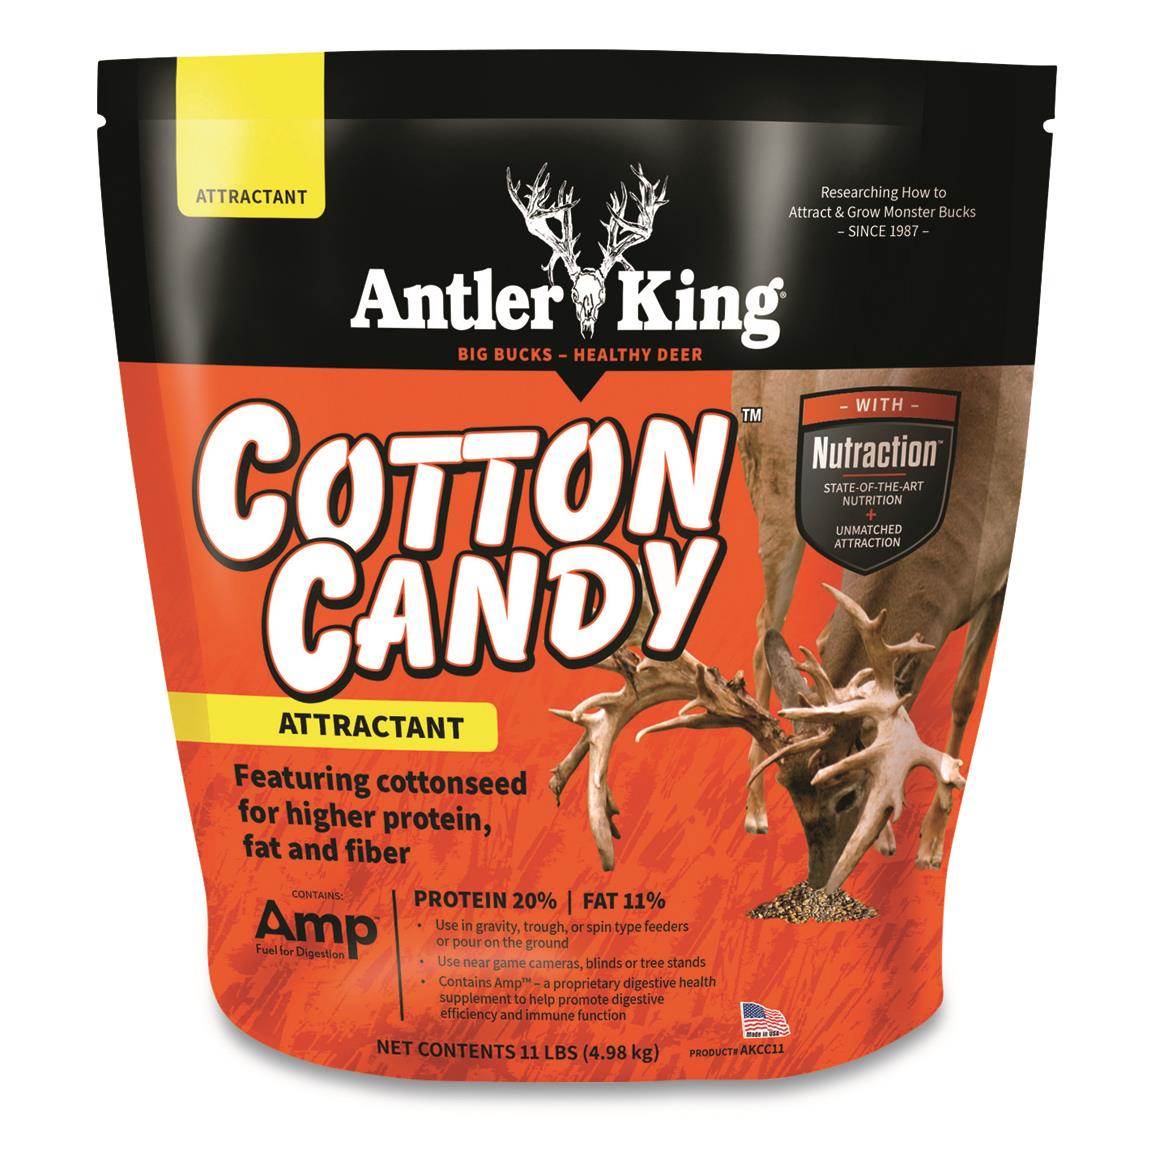 Antler King Cotton Candy Deer Attractant, 11 lbs.